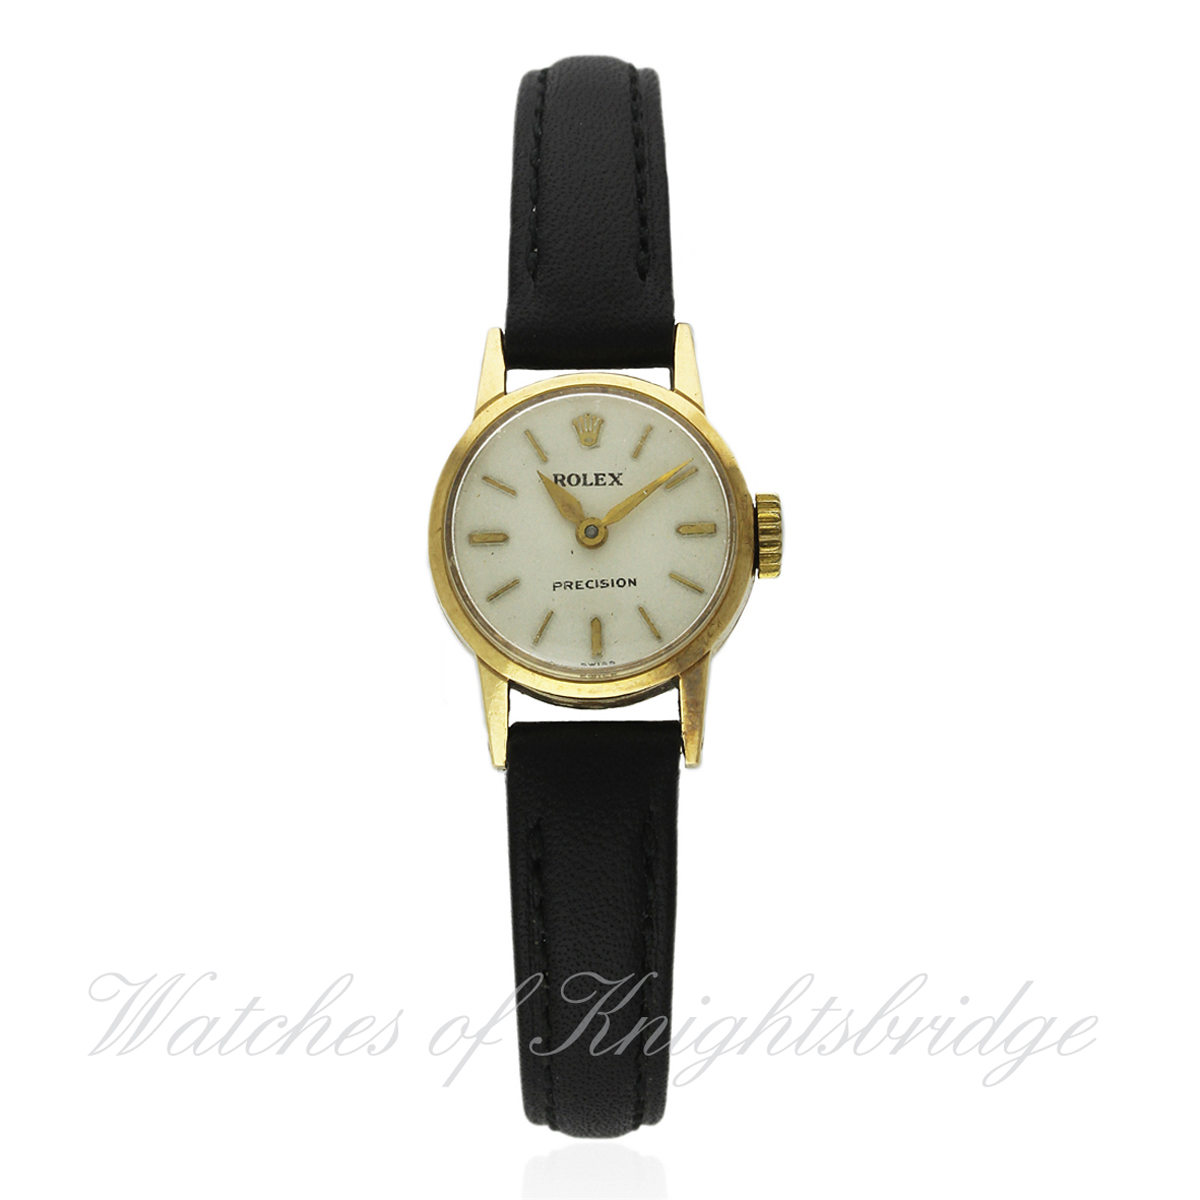 A LADIES 9CT SOLID GOLD ROLEX PRECISION WRIST WATCH CIRCA 1960s, REF. 9168 D: Silver dial with